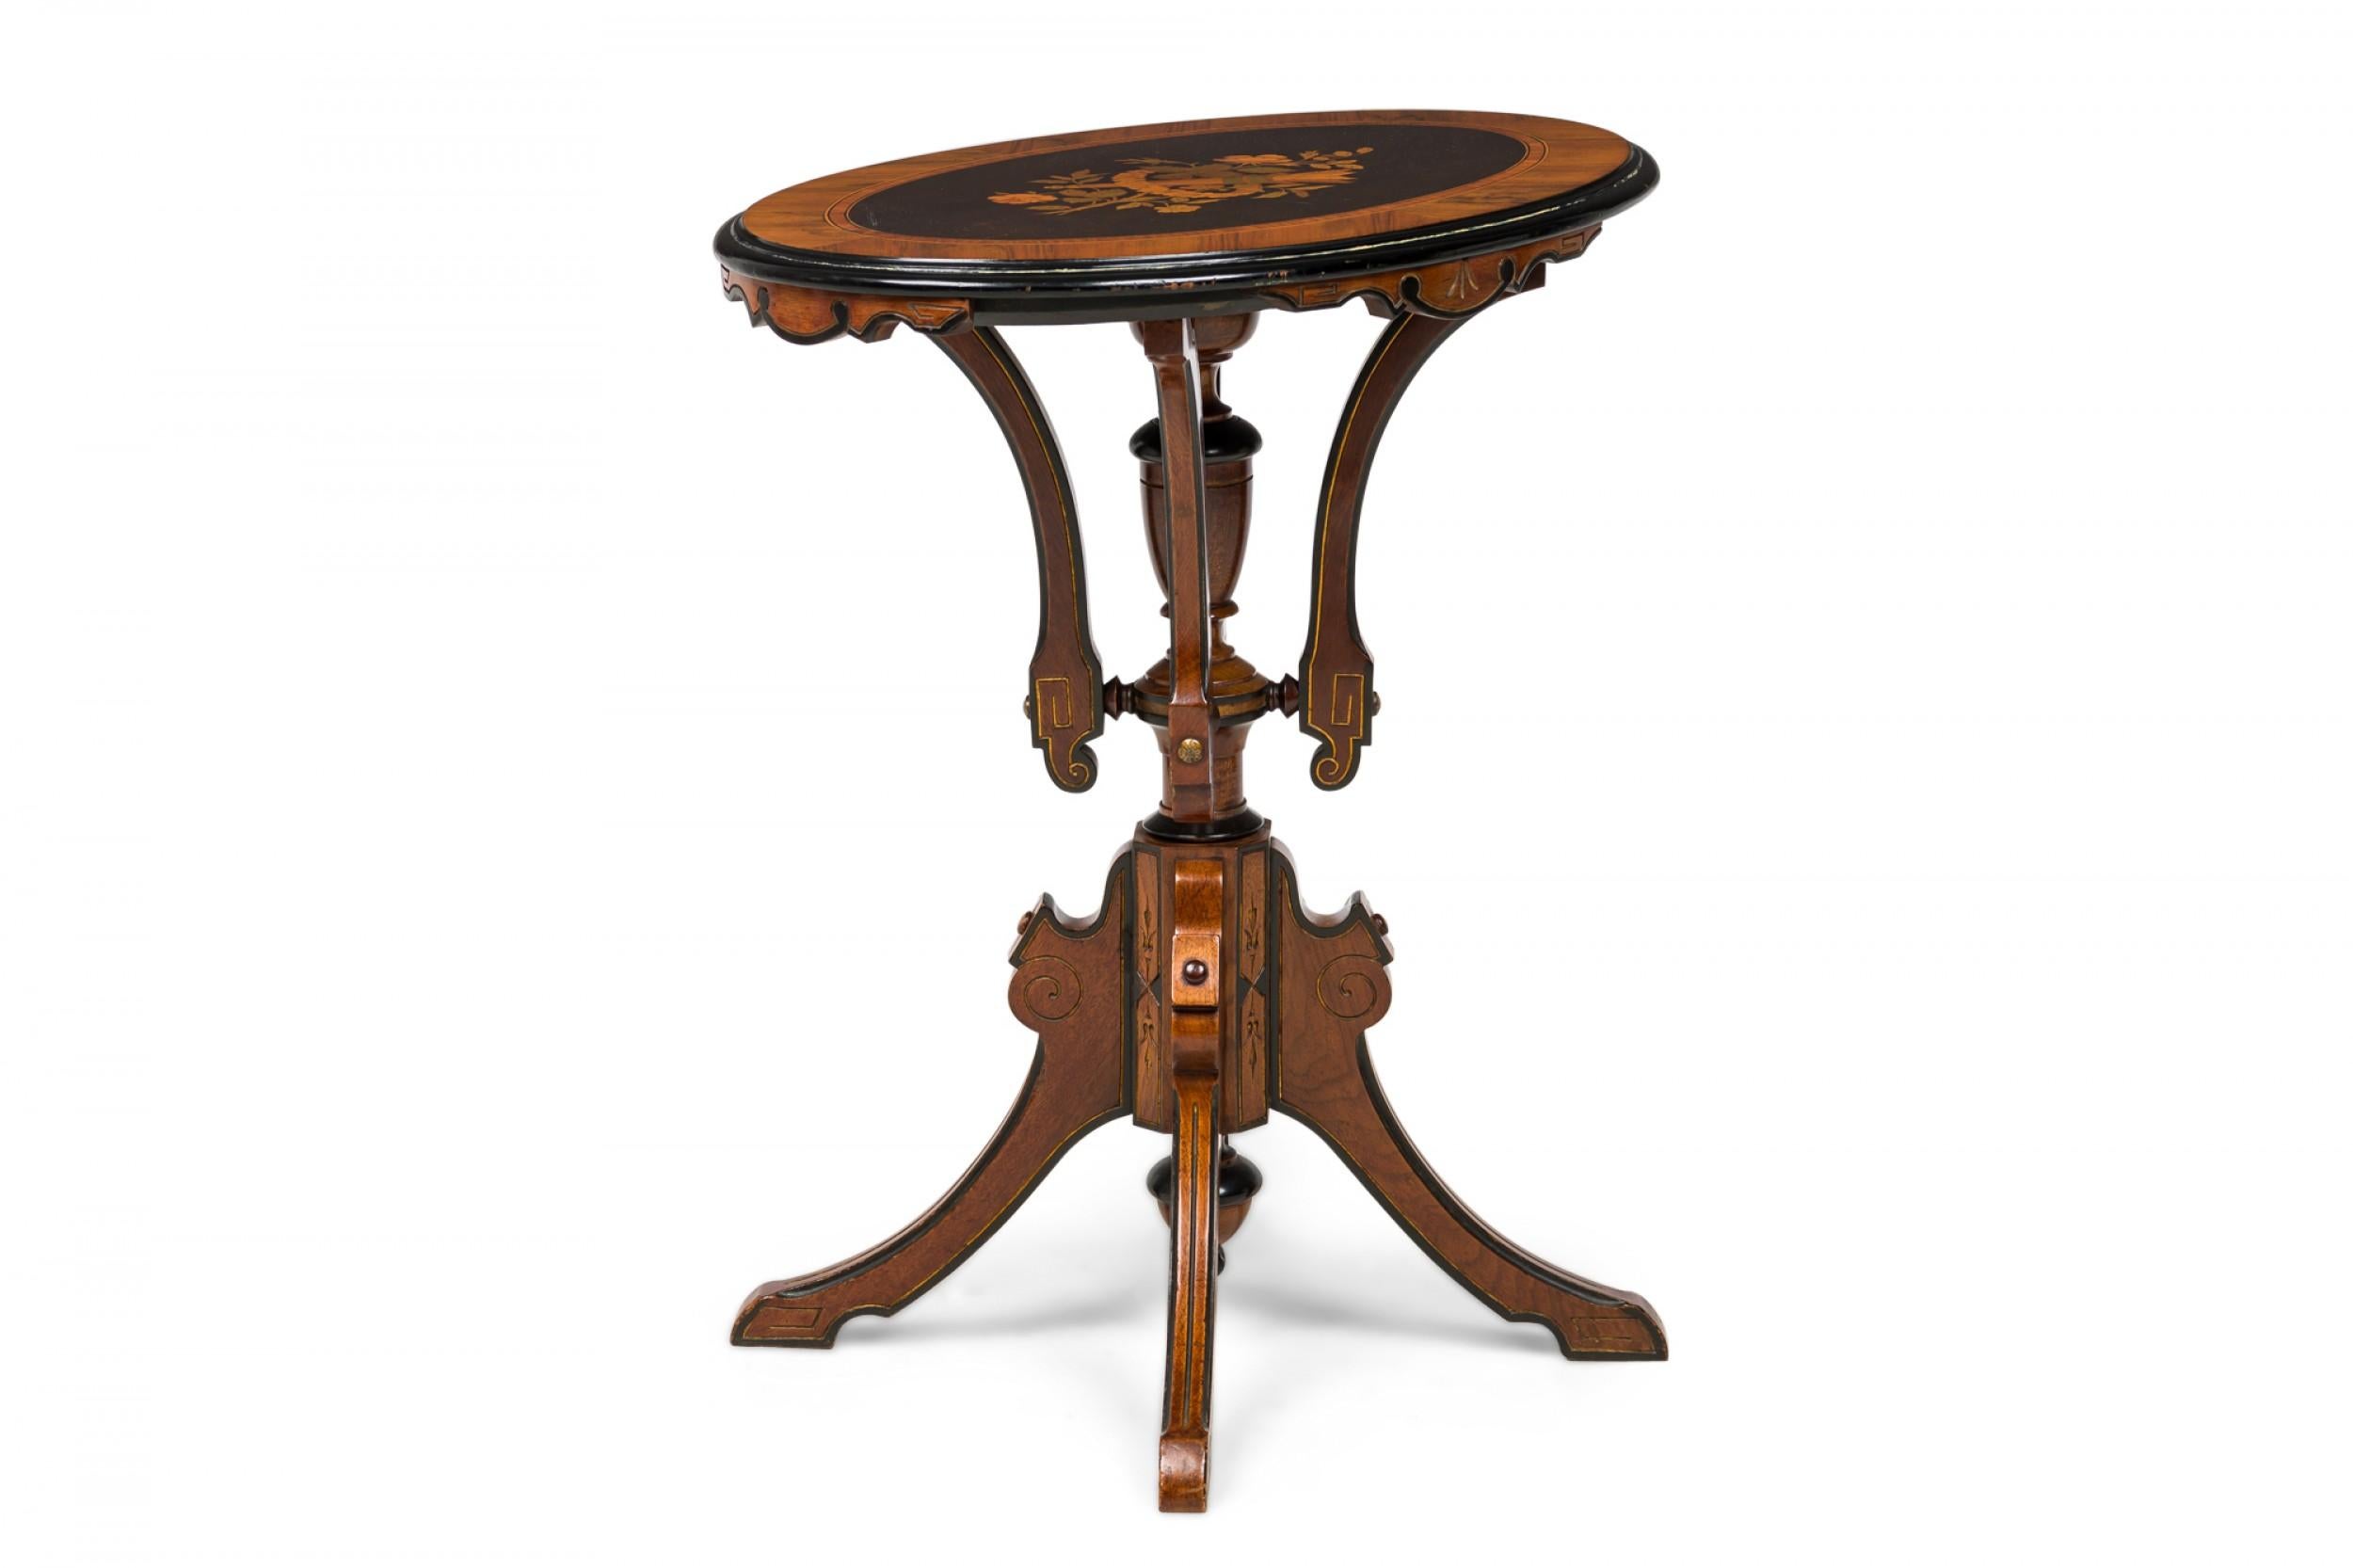 19th Century American Victorian Wood Inlaid Oval Side Table with Carved Supports